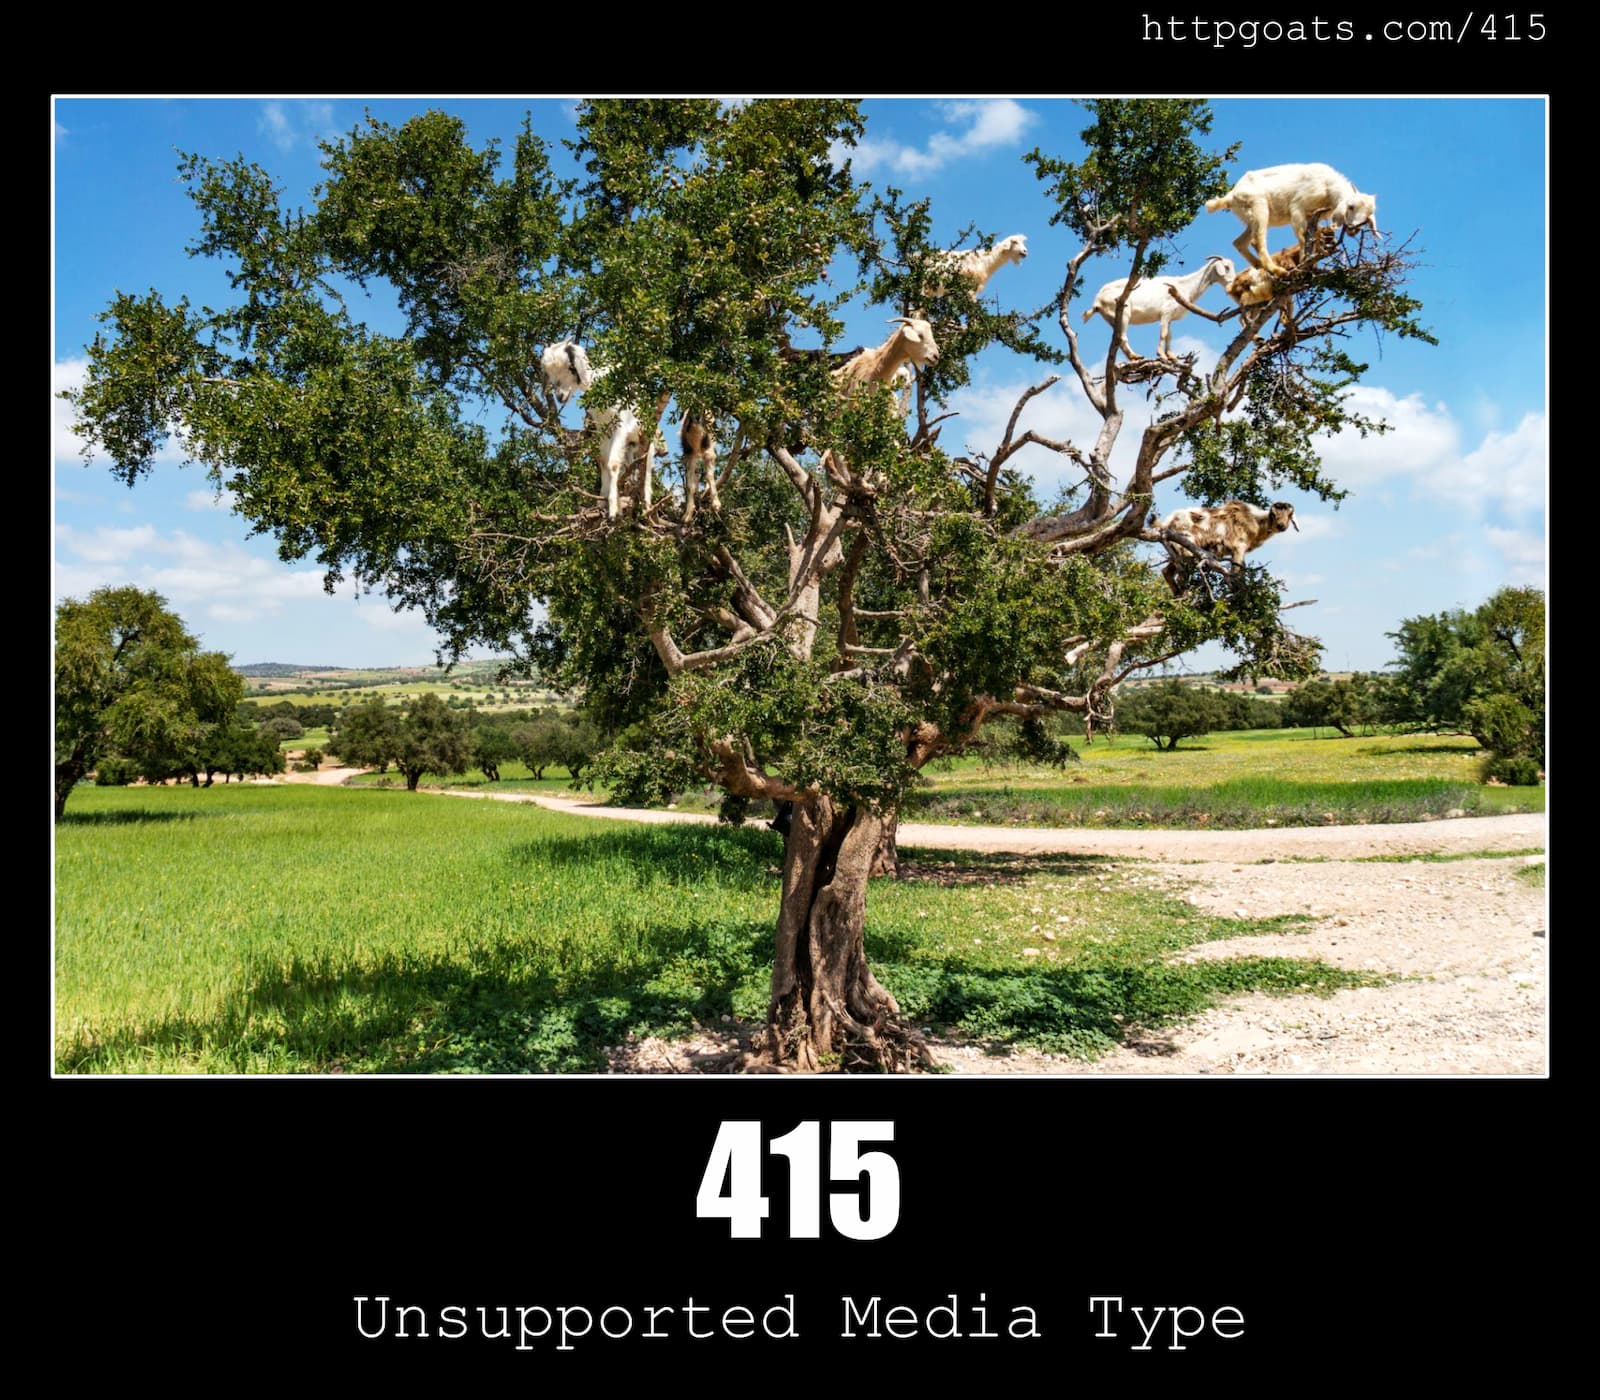 HTTP Status Code 415 Unsupported Media Type & Goats